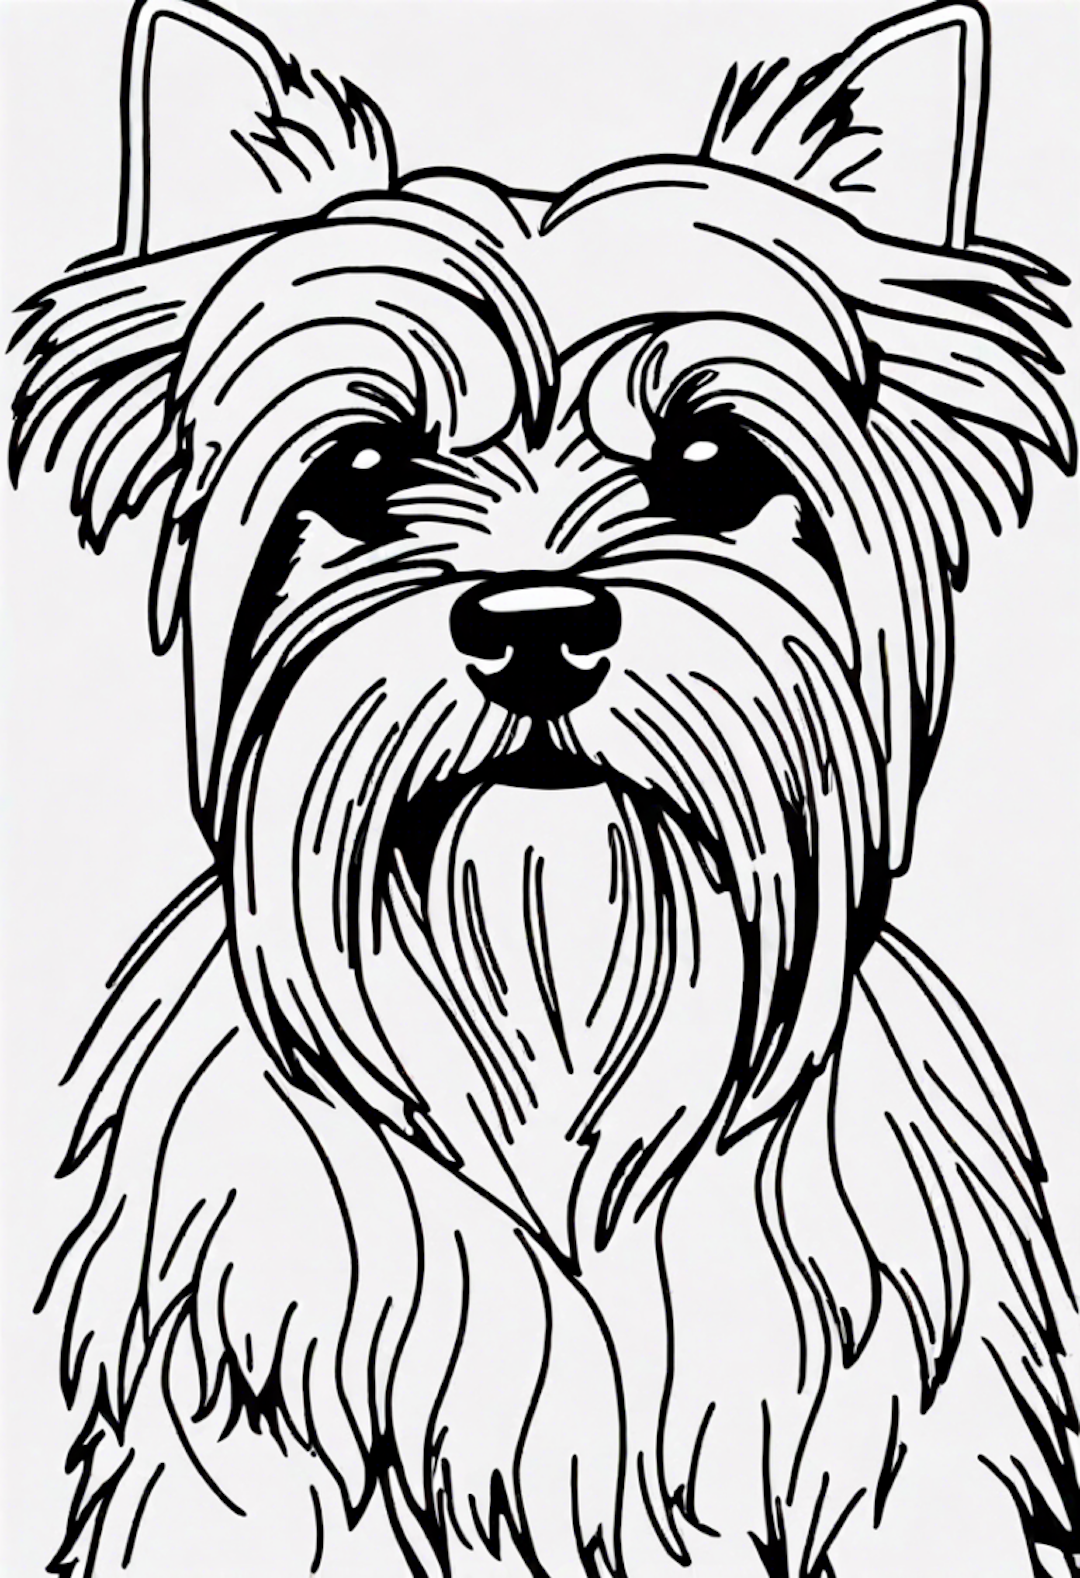 Yorkshire Terrier coloring pages